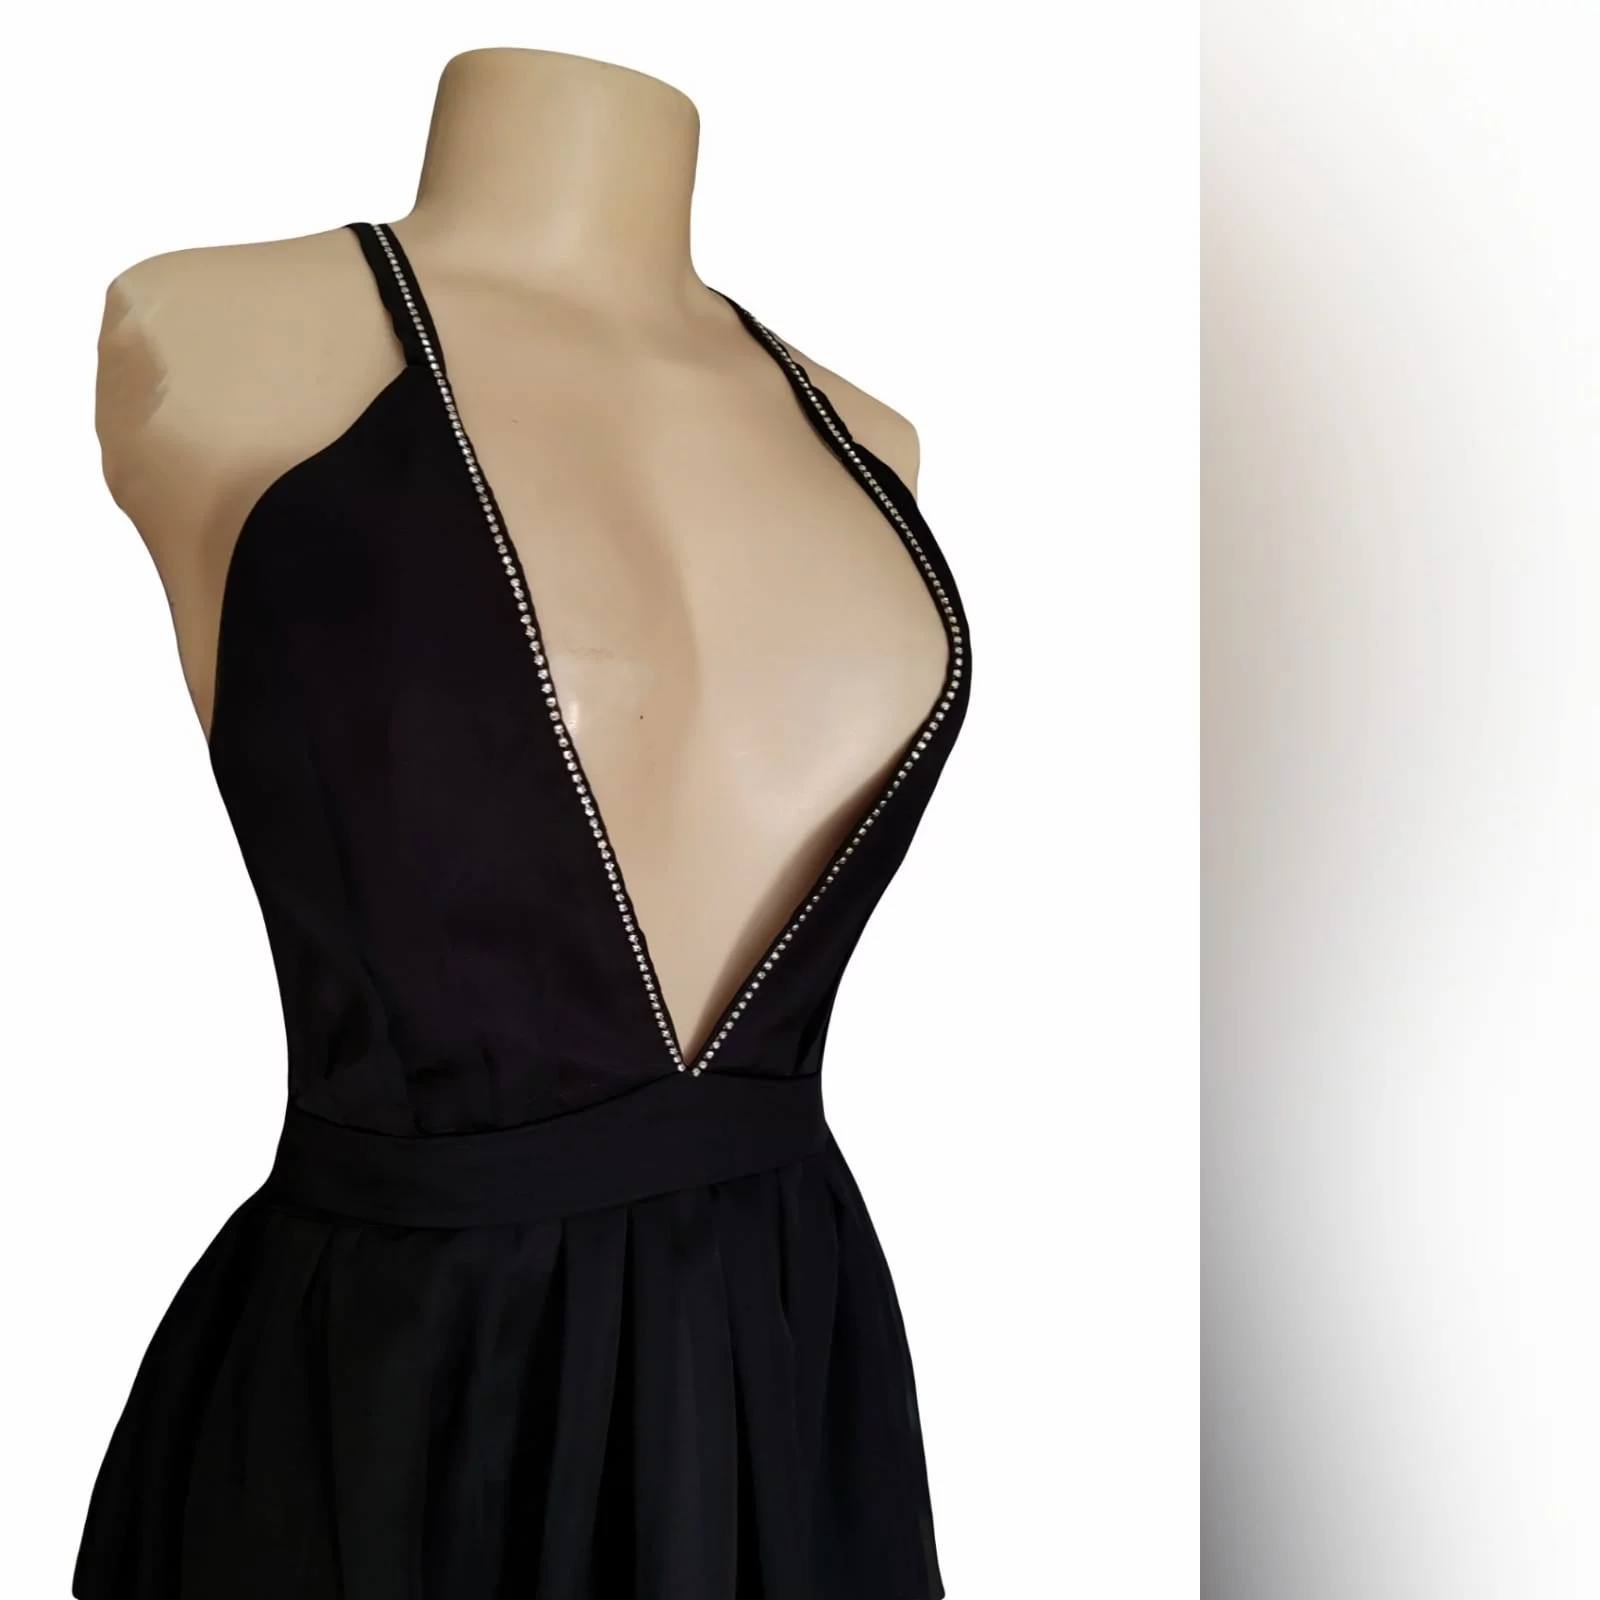 Sexy black plunging neckline prom dress 5 sexy black plunging neckline prom dress, with a naked back, crossed straps detailed with diamante and 2 slits